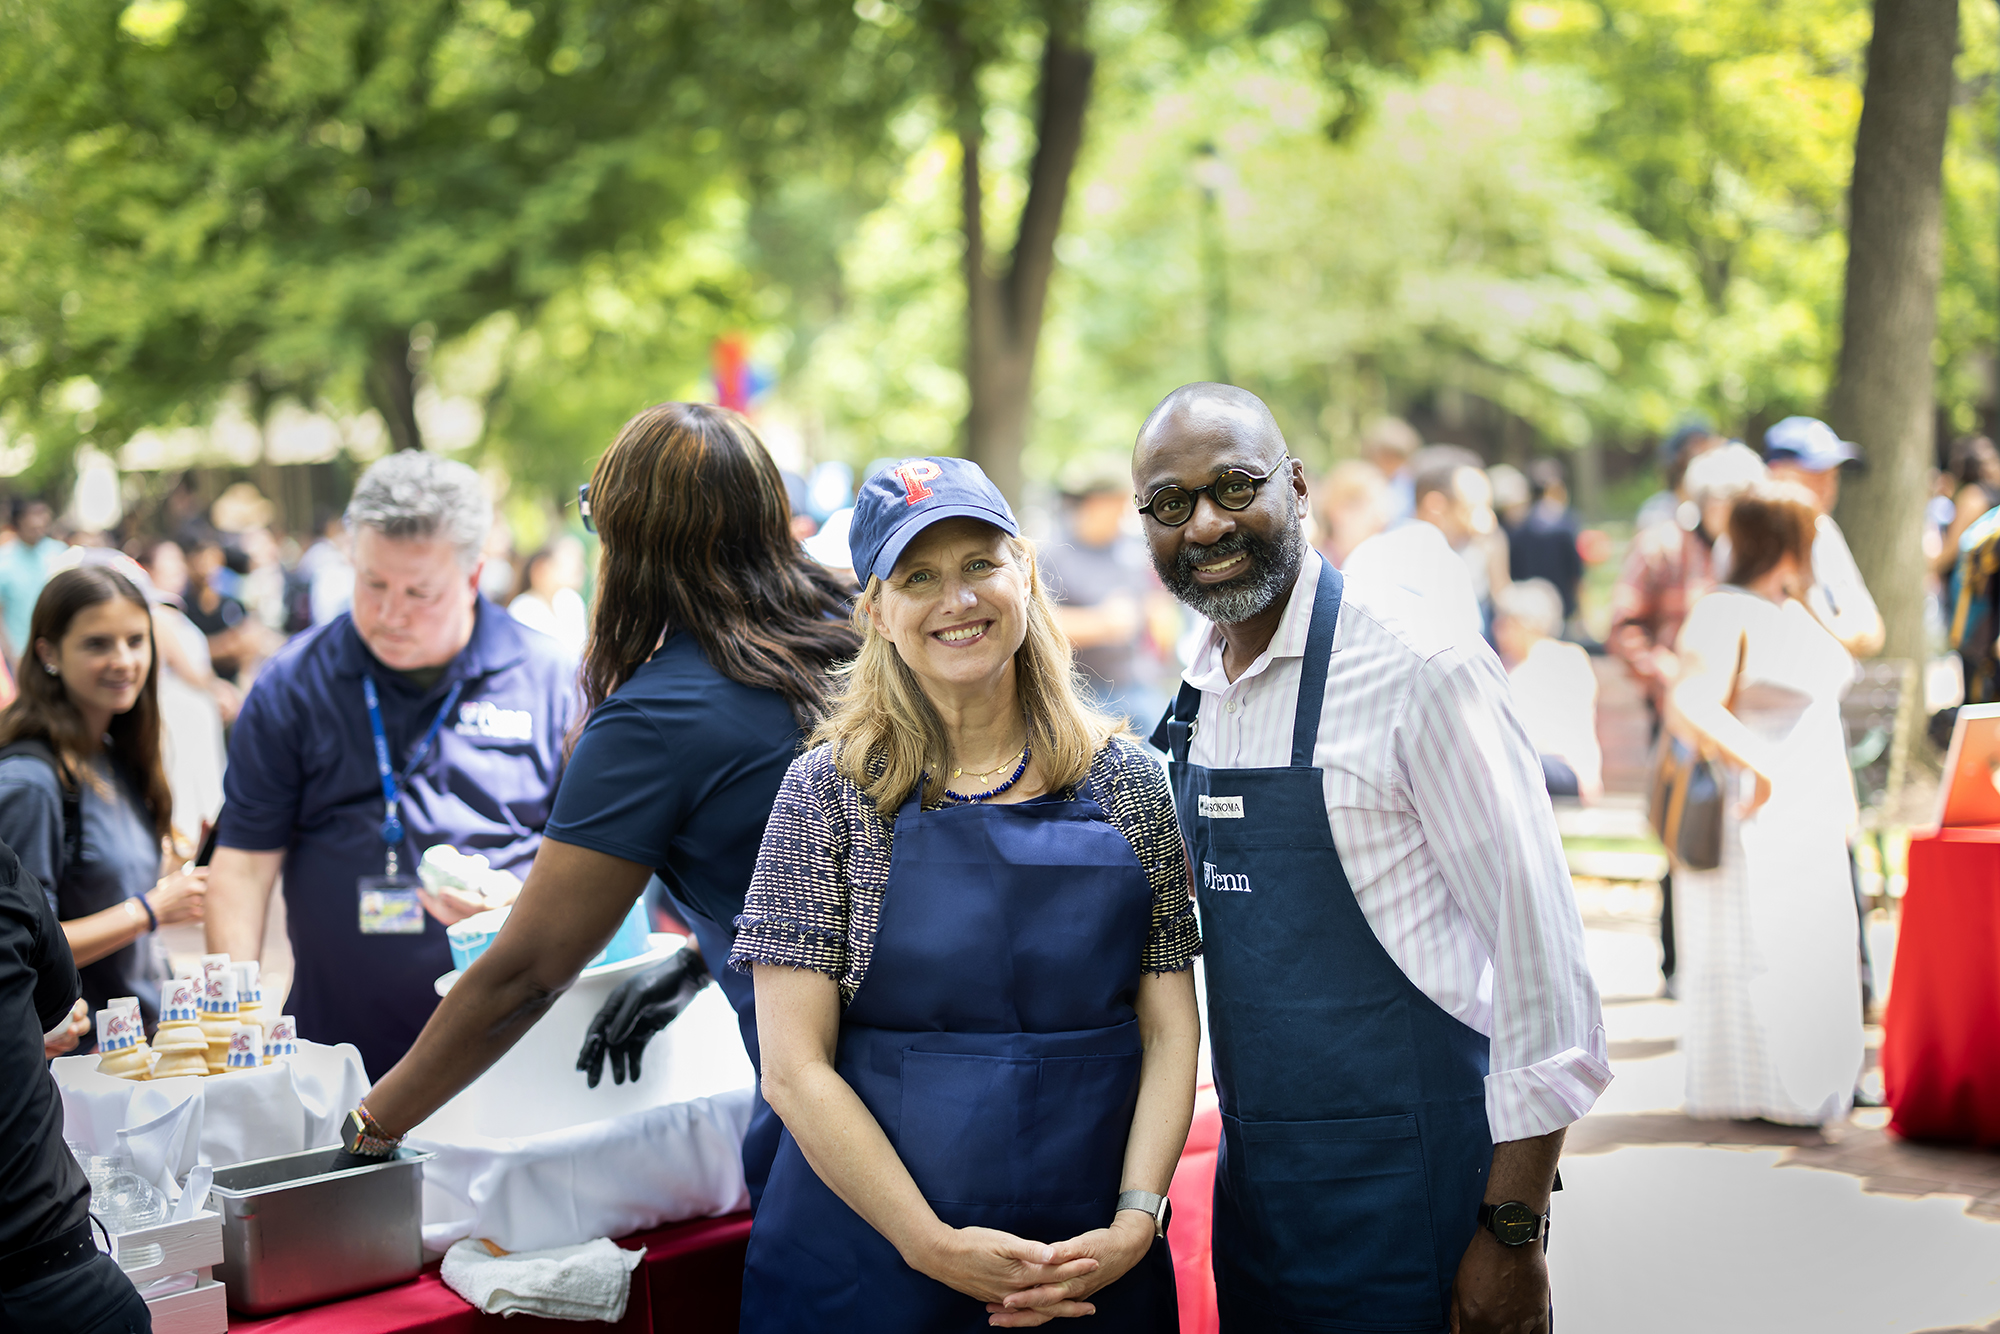 Liz Magill and John L. Jackson Jr. at the Ice Cream Social on College Green.